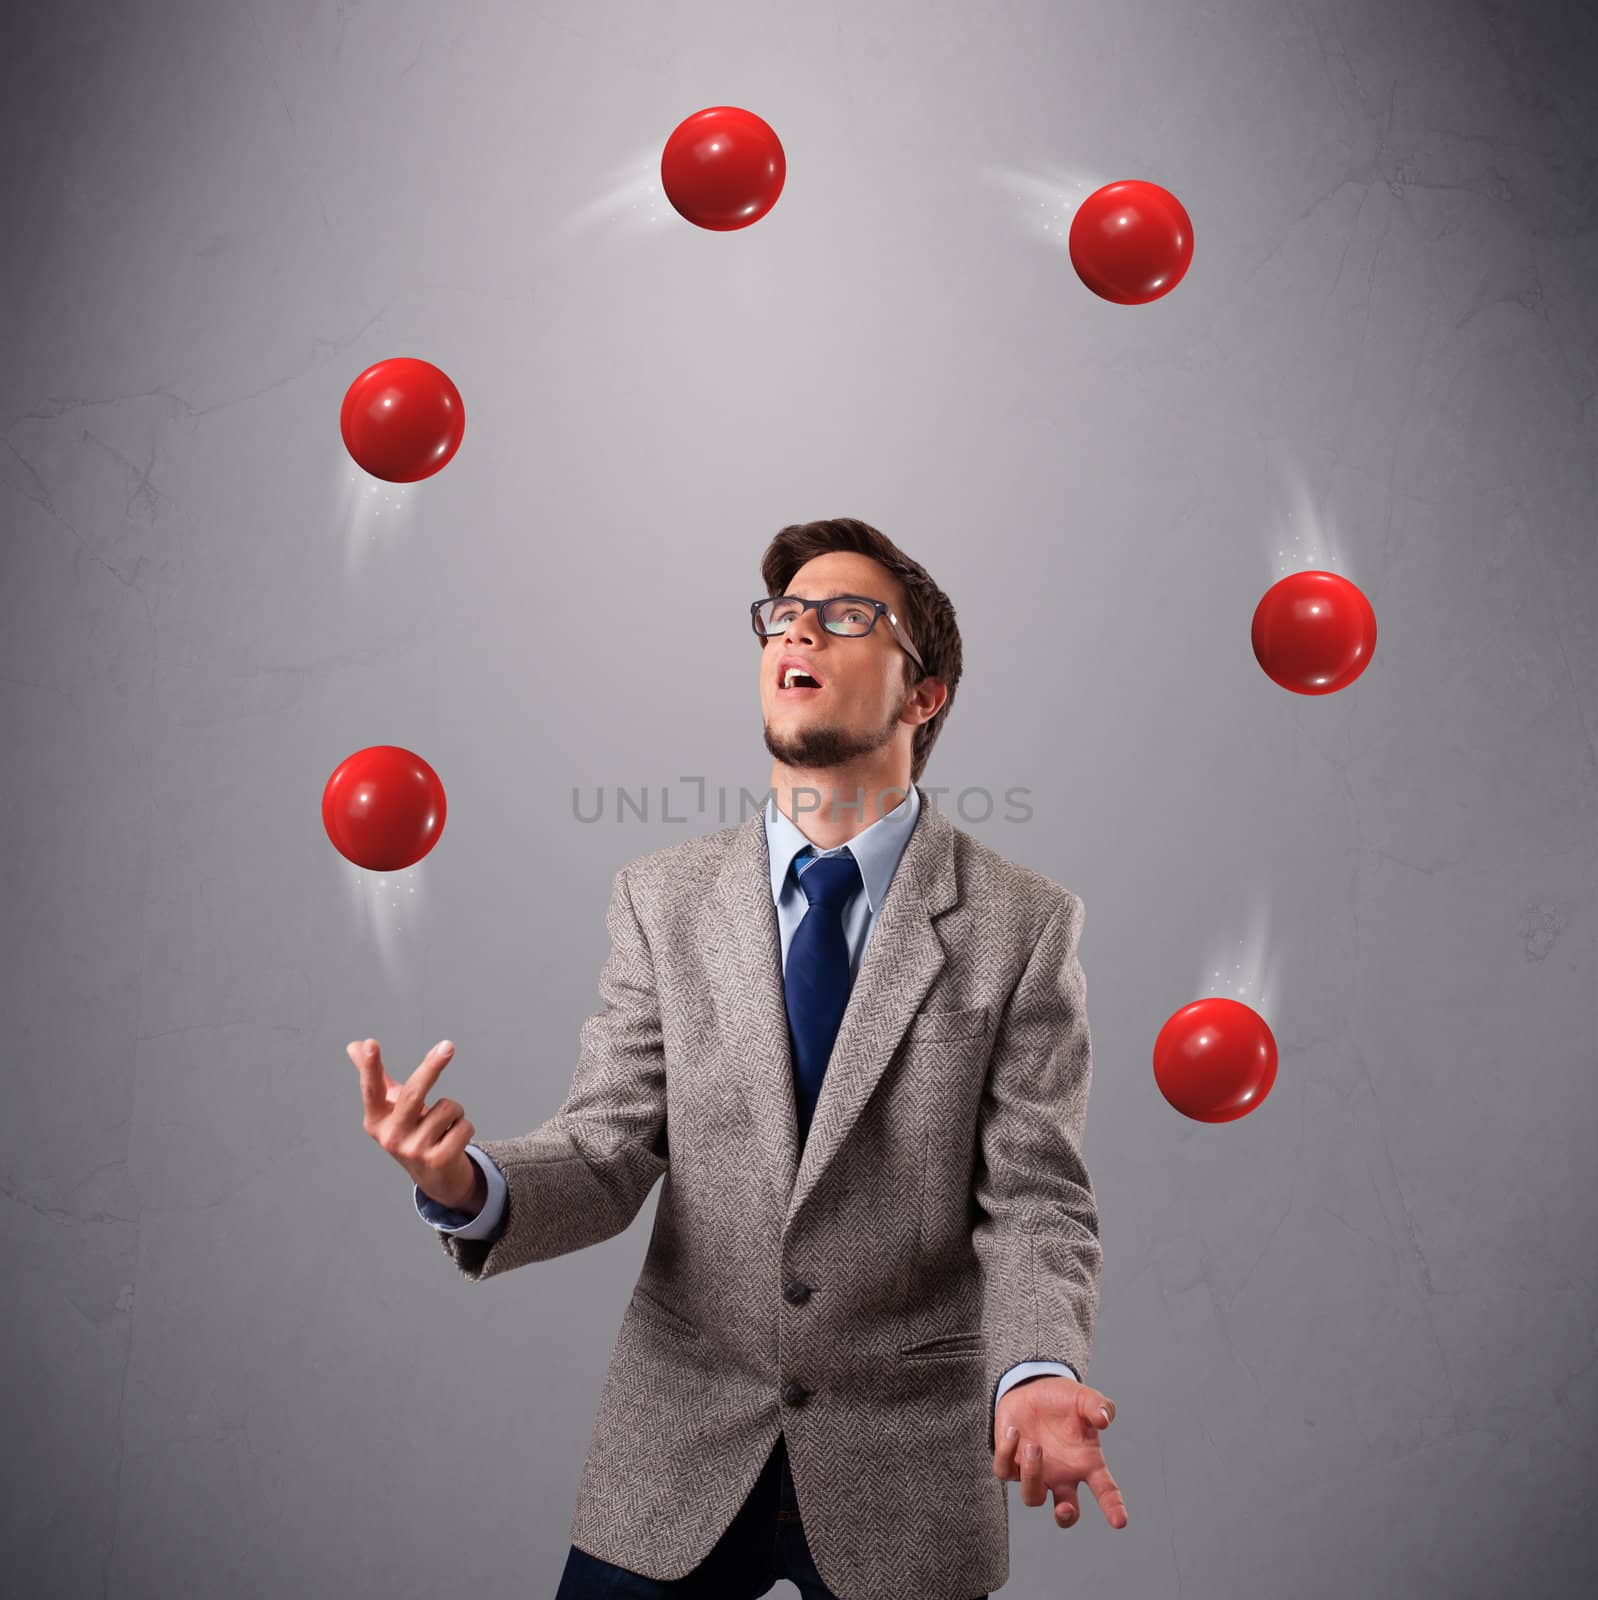 handsome young man standing and juggling with red balls